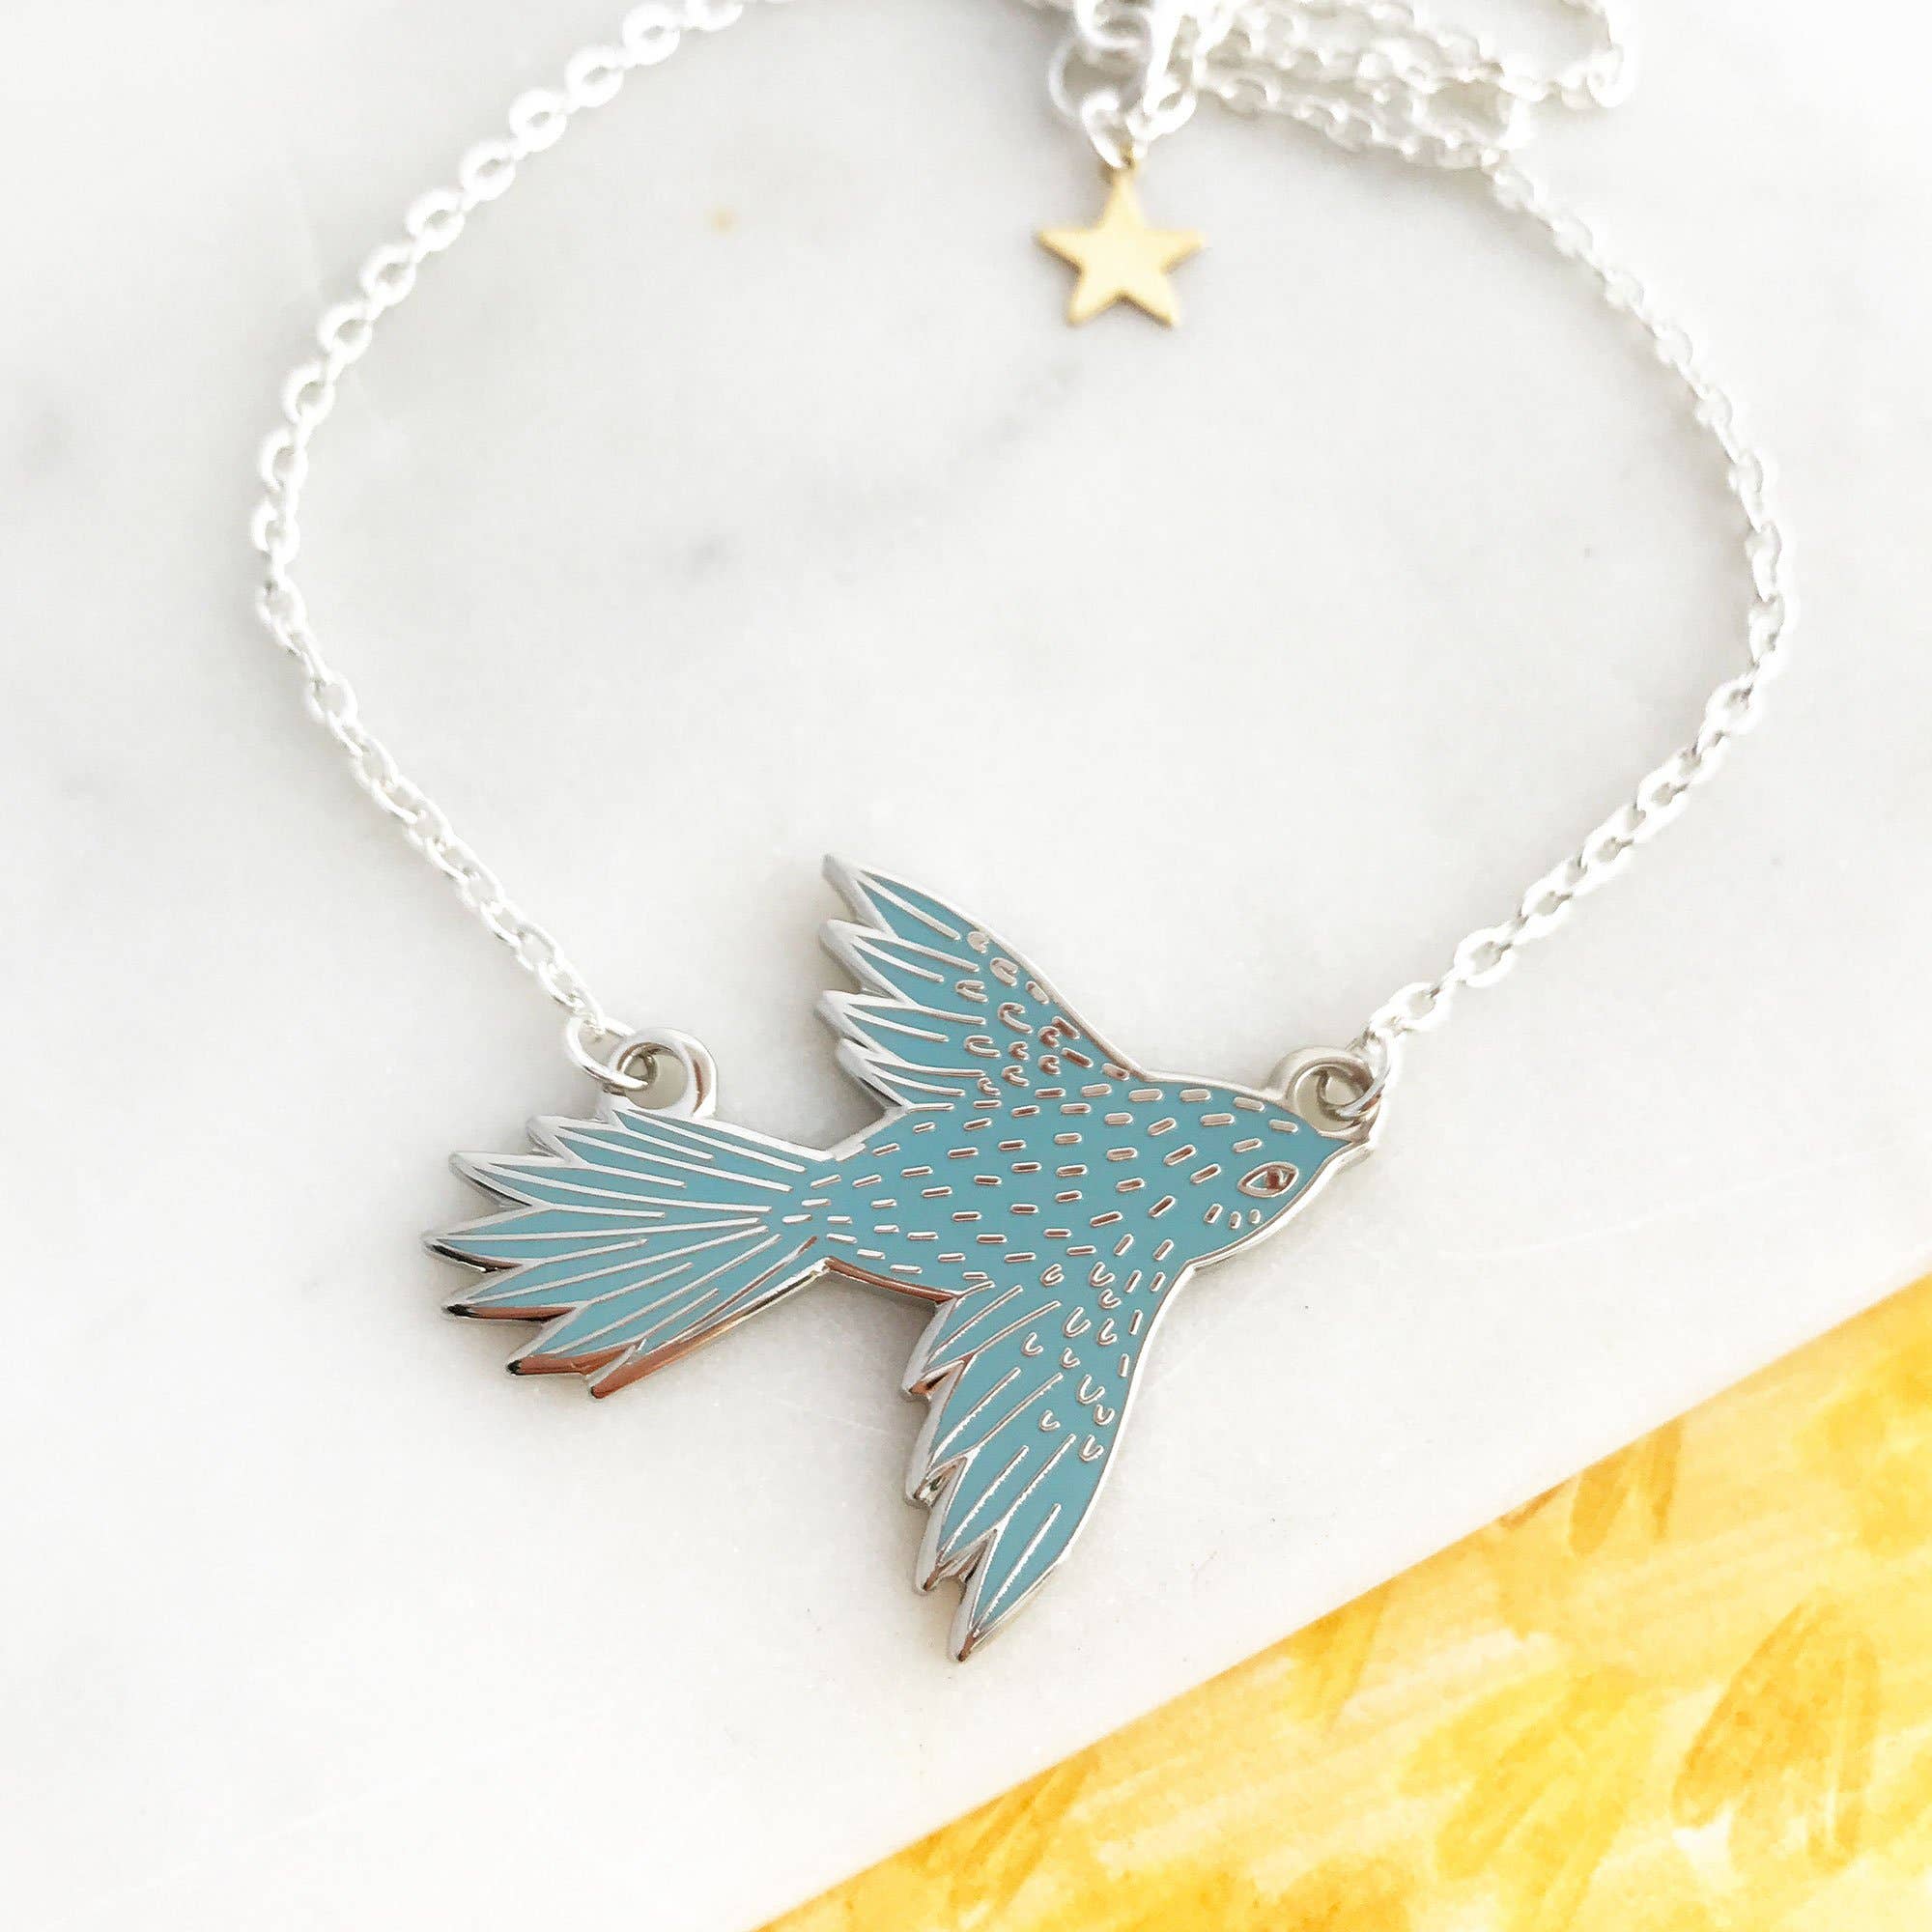 Buy Bird Necklace, Dove, Pigeon, Flying Bird, Tiny, Gold Plated, Glass  Crystal, Dainty, Cute, Bird Jewelry, Animal Necklace Online in India - Etsy